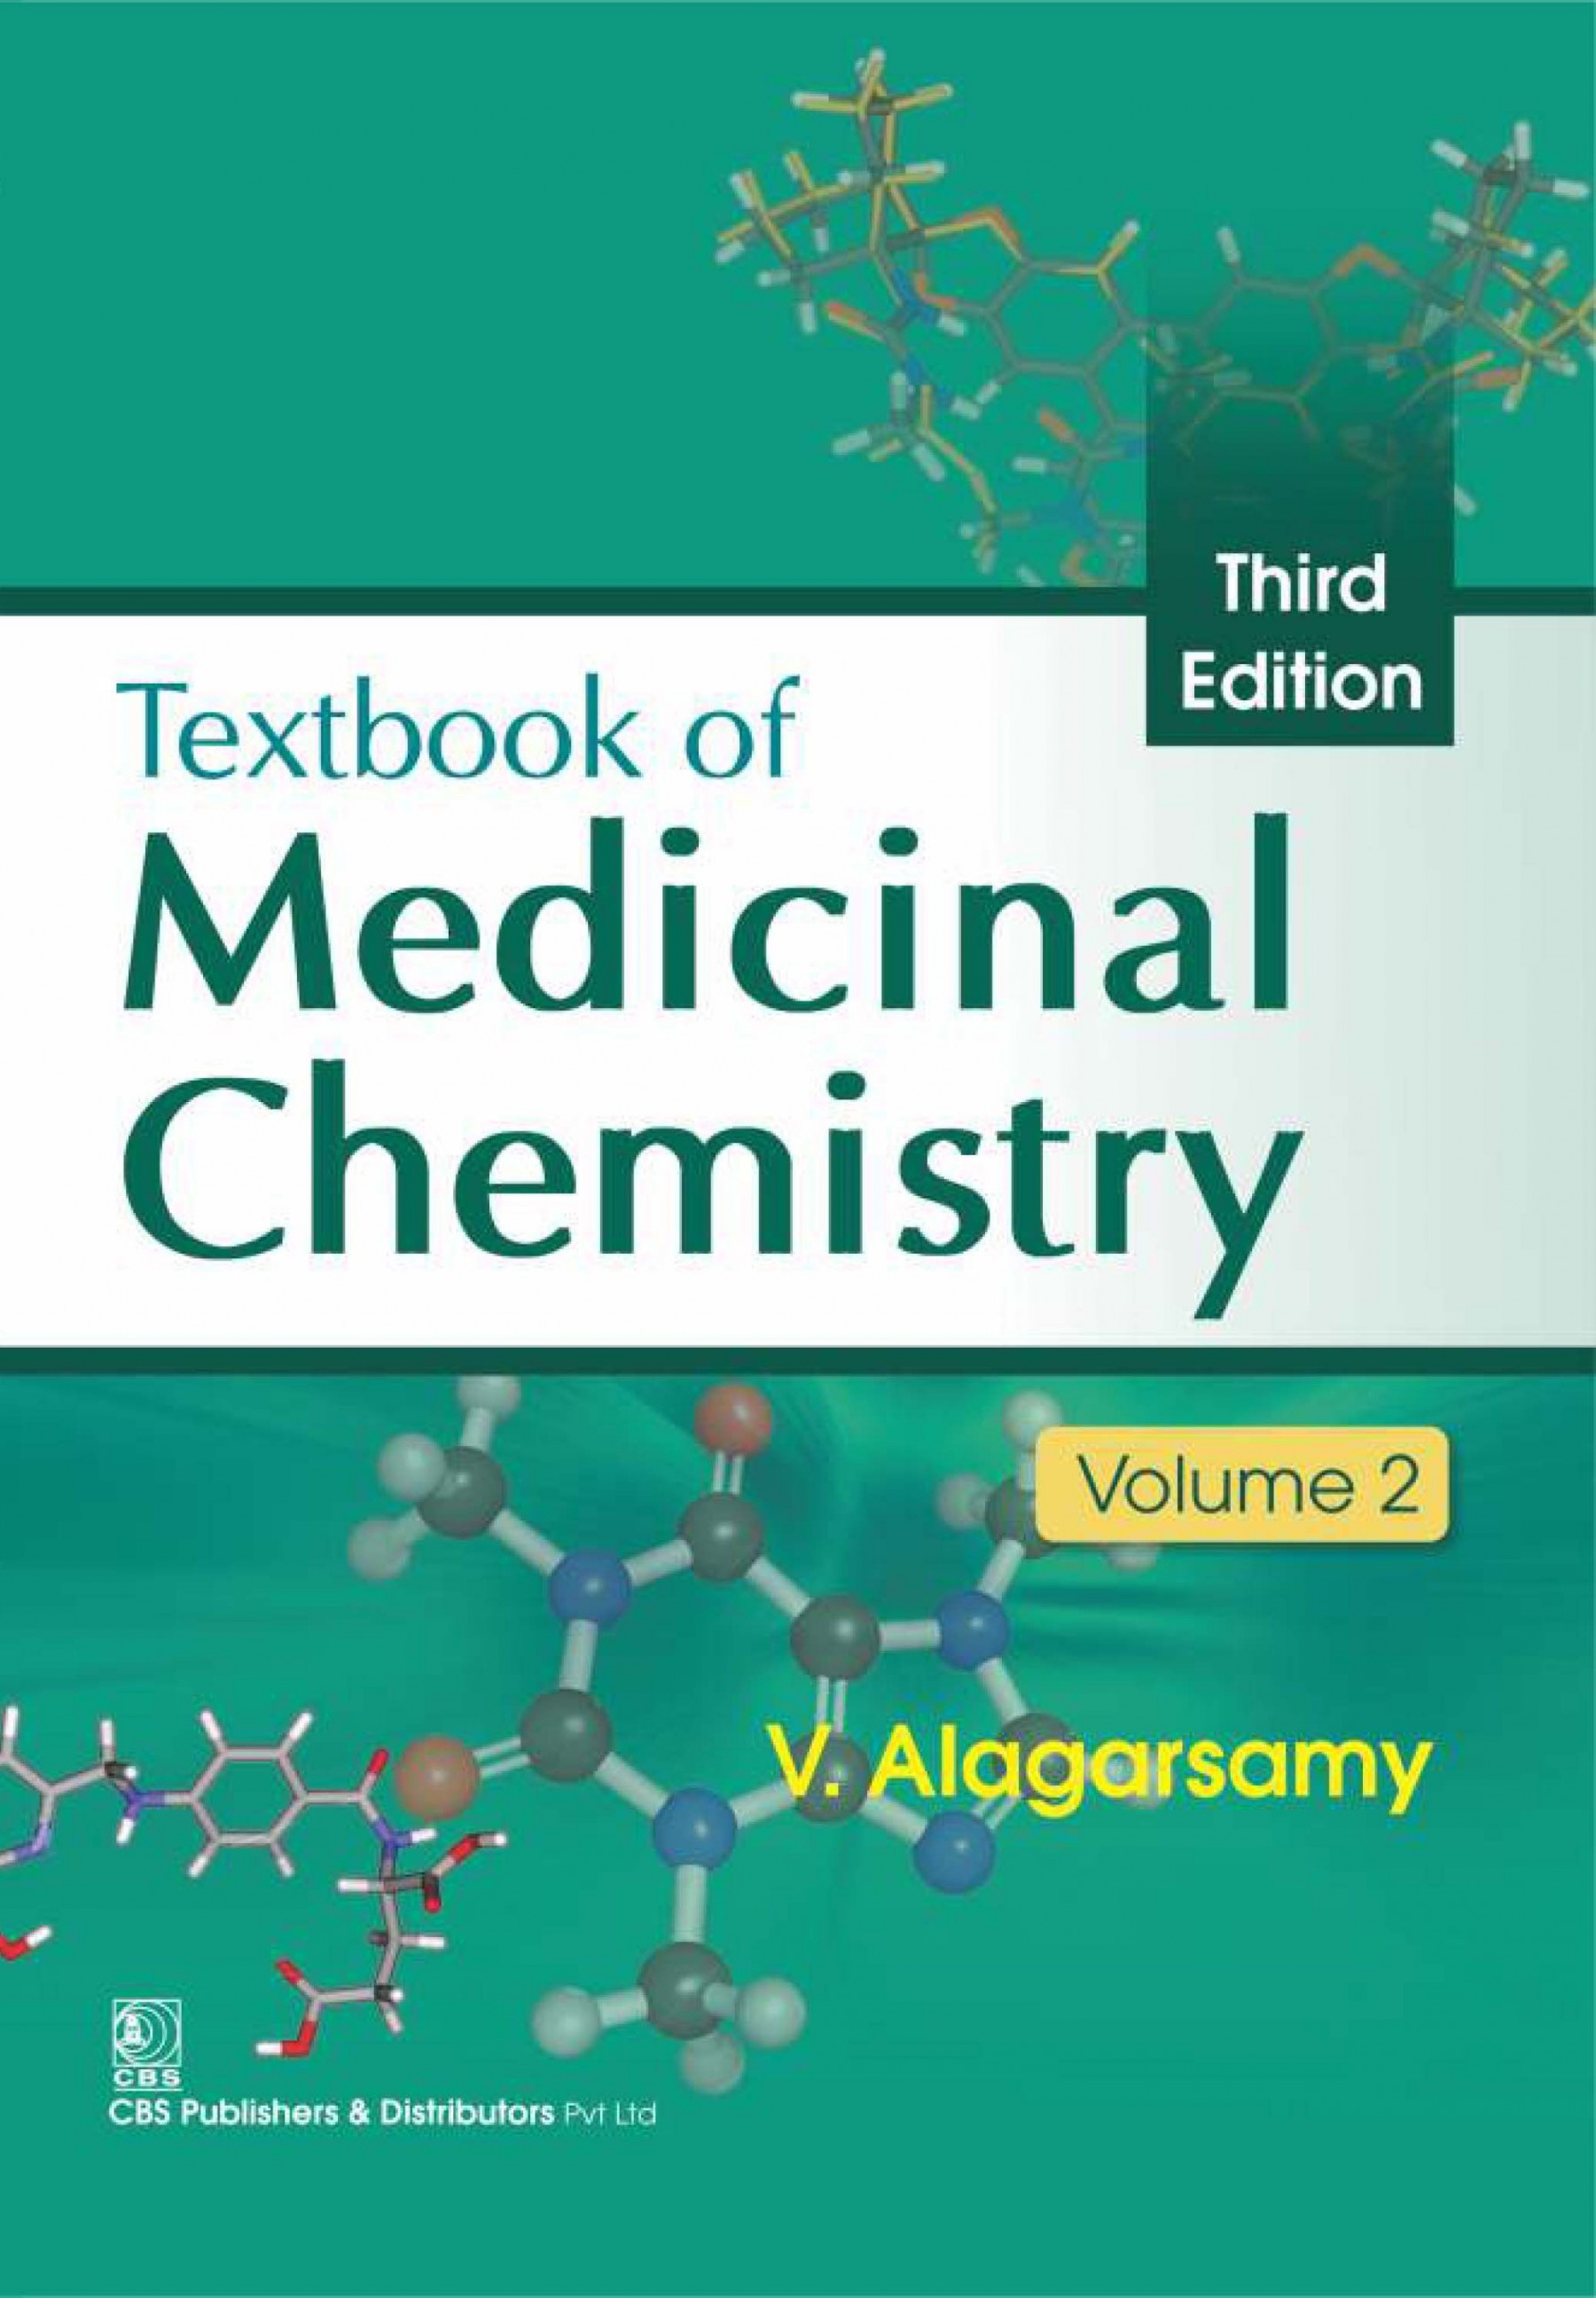 Textbook of Medicinal Chemistry, 3/e, Volume 2 (4th reprint)